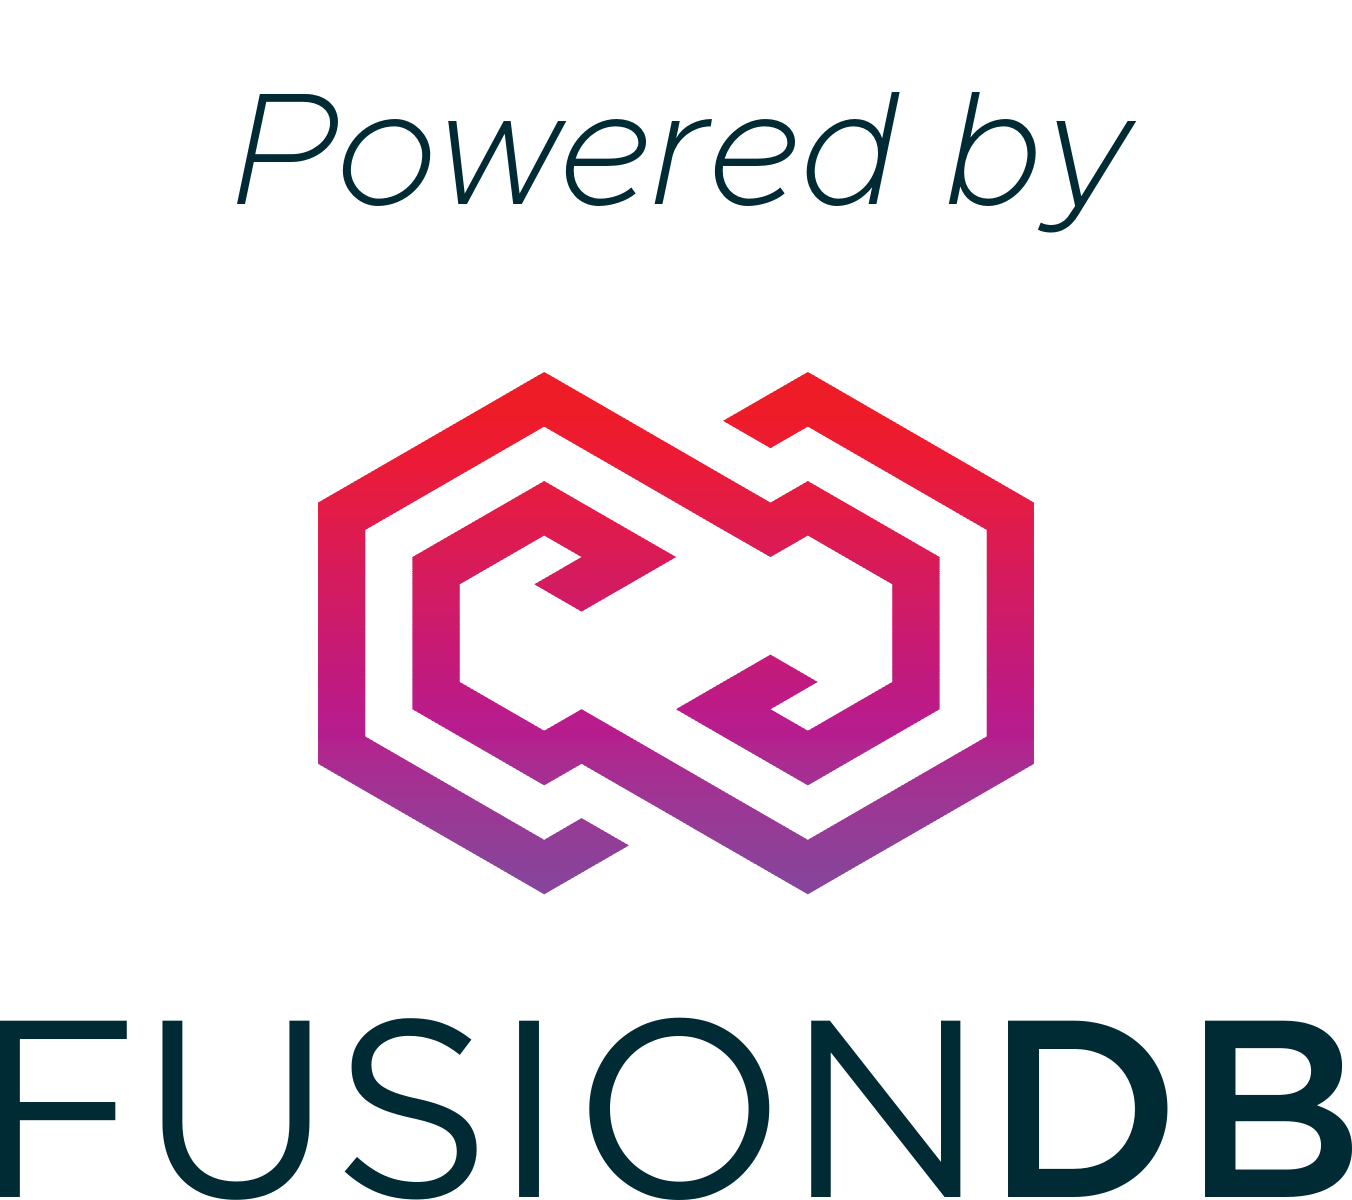 Powered by FusionDB